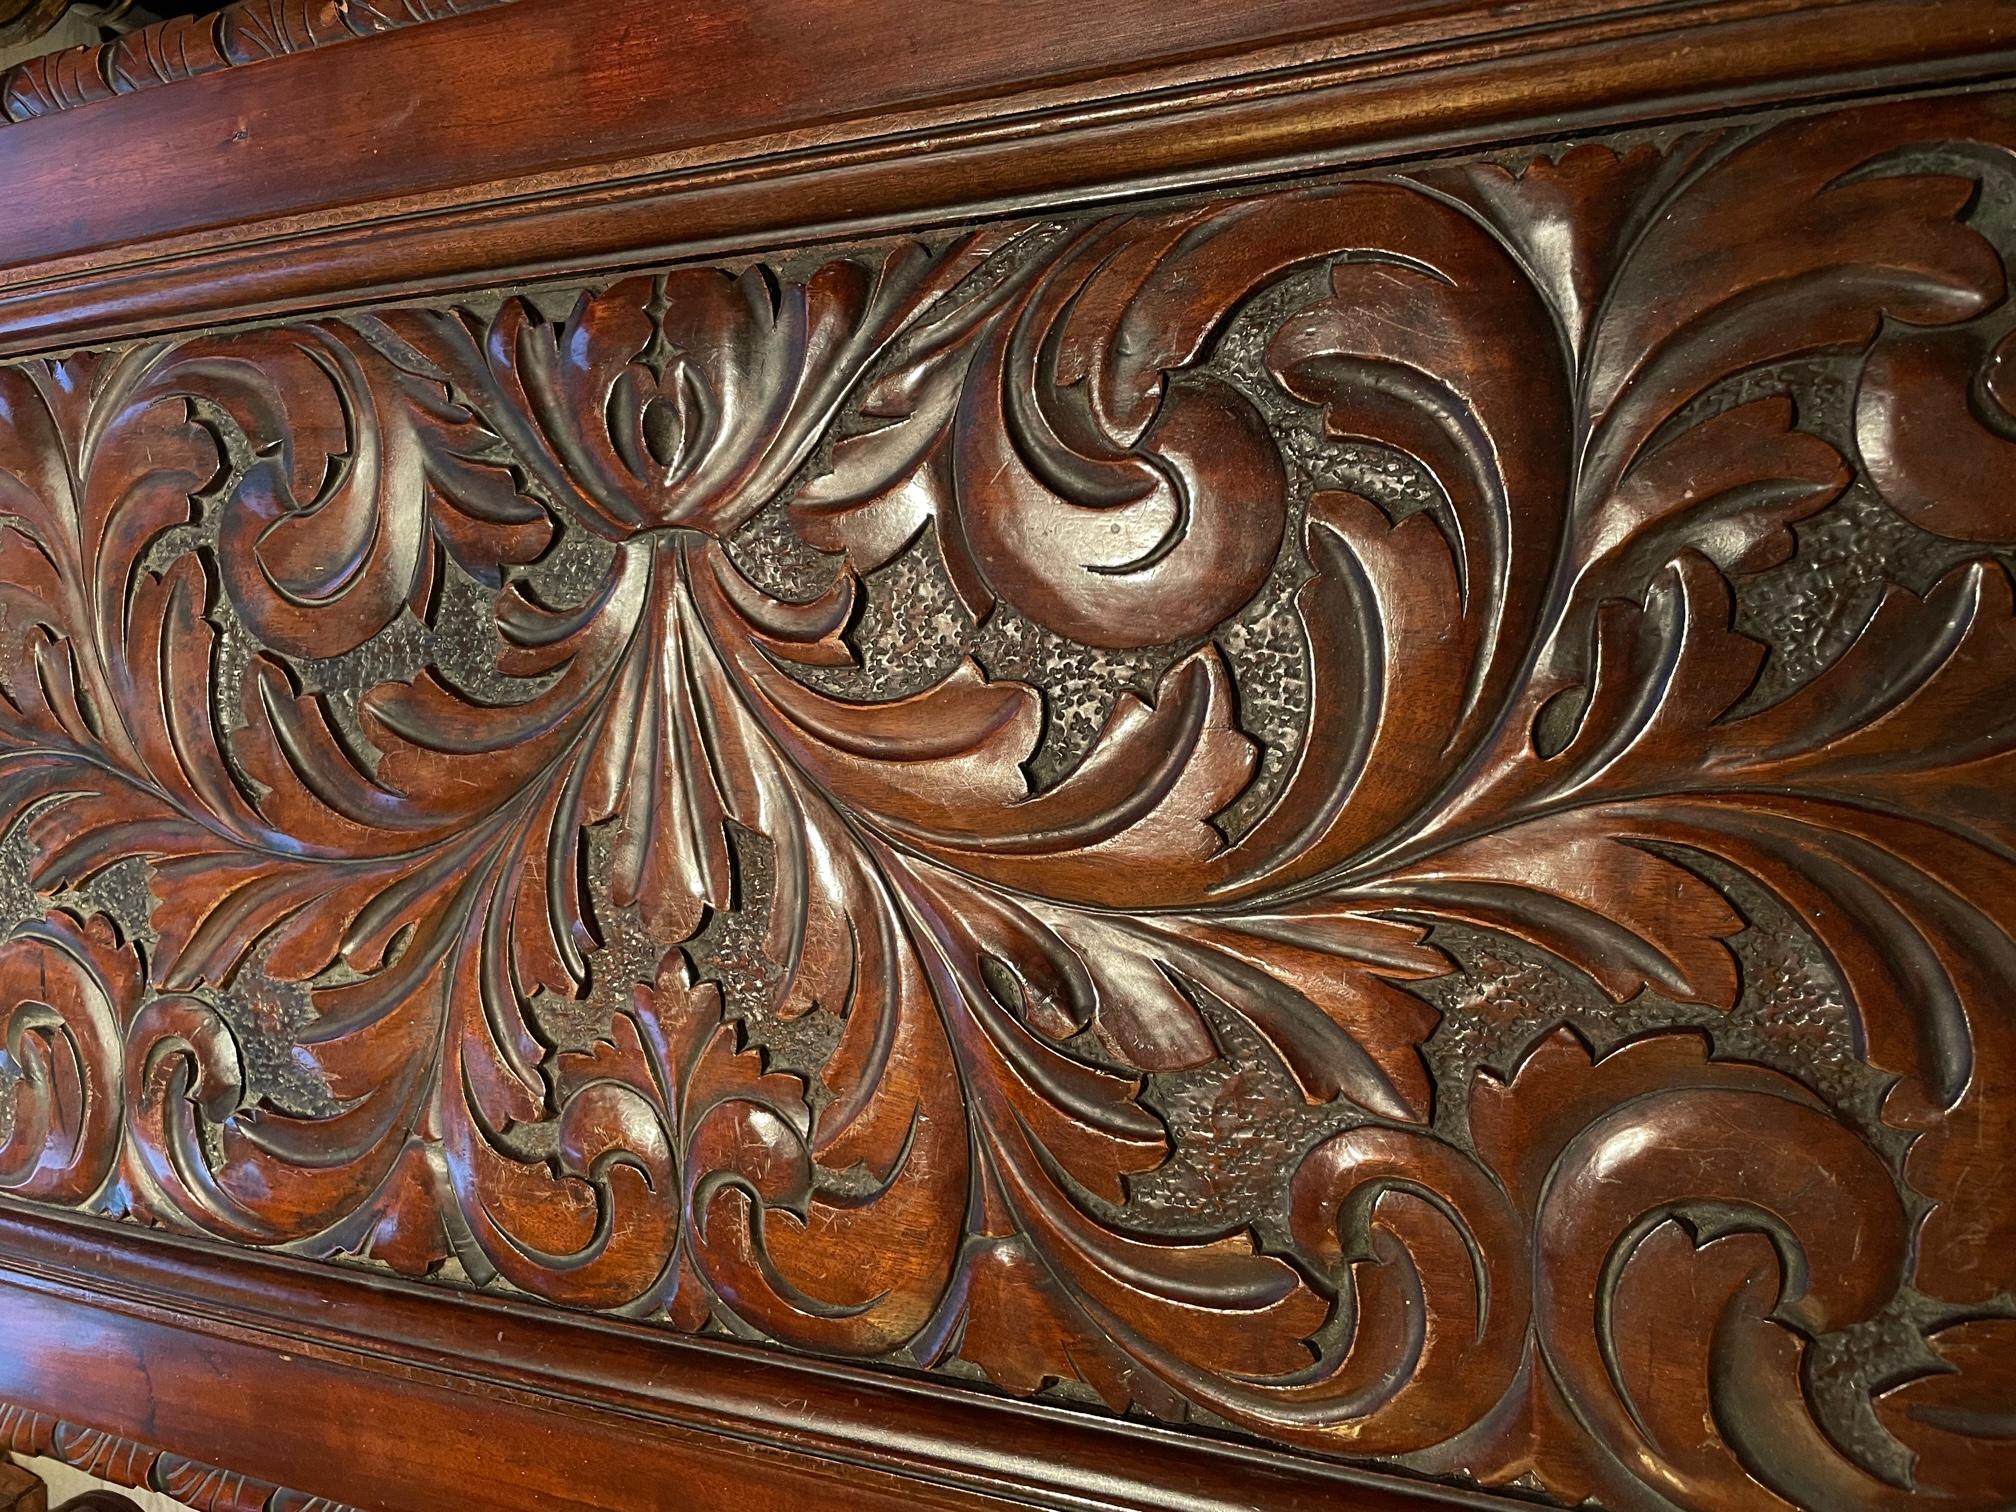 Fruitwood 19th Century Baroque Revival Carved Wooden Blanket Chest For Sale